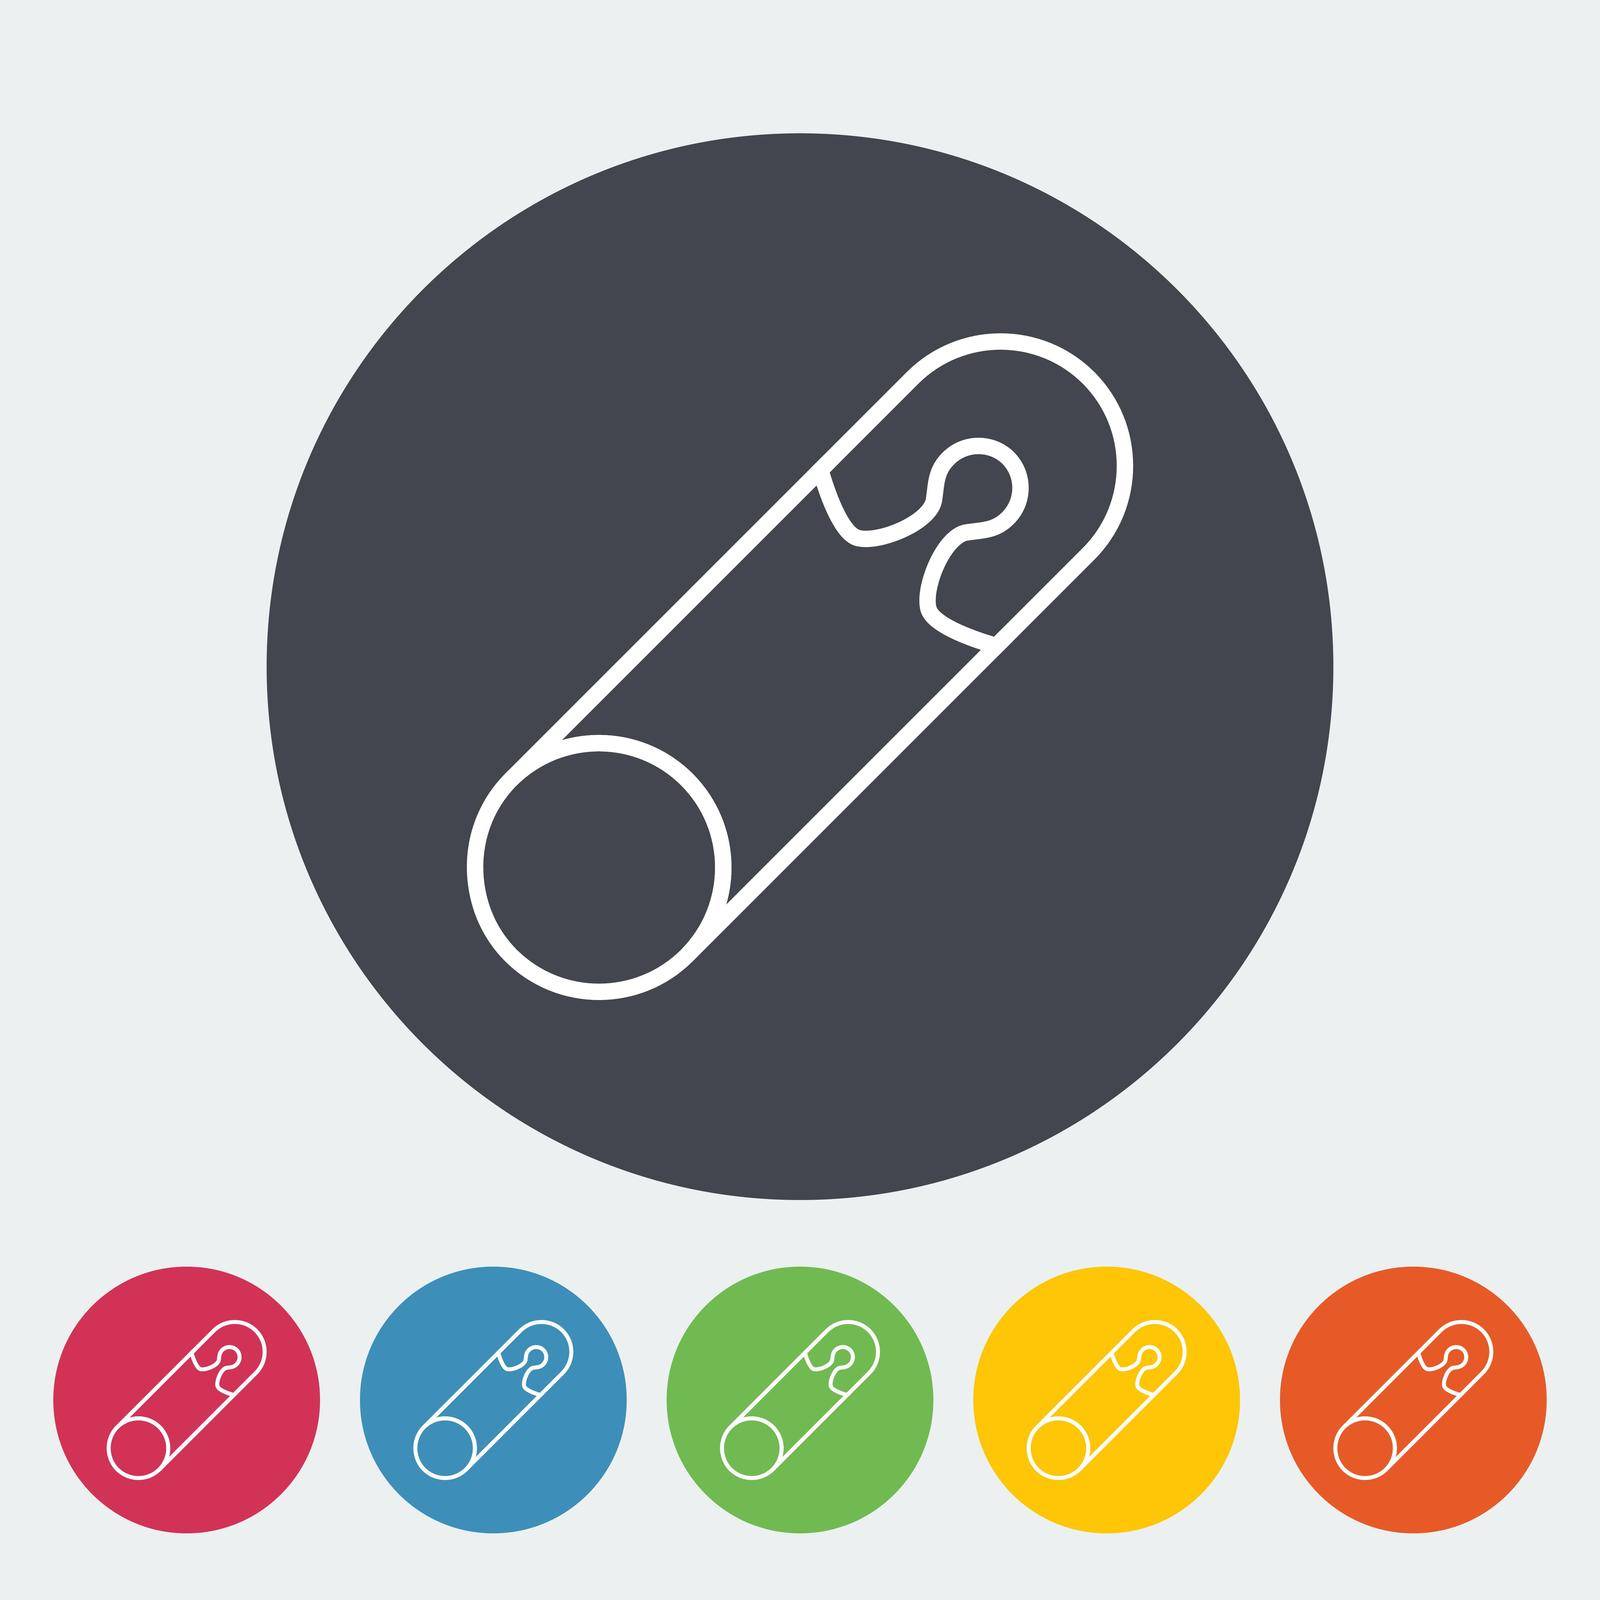 Safety pin icon. Thin line flat vector related icon for web and mobile applications. It can be used as - logo, pictogram, icon, infographic element. Vector Illustration.